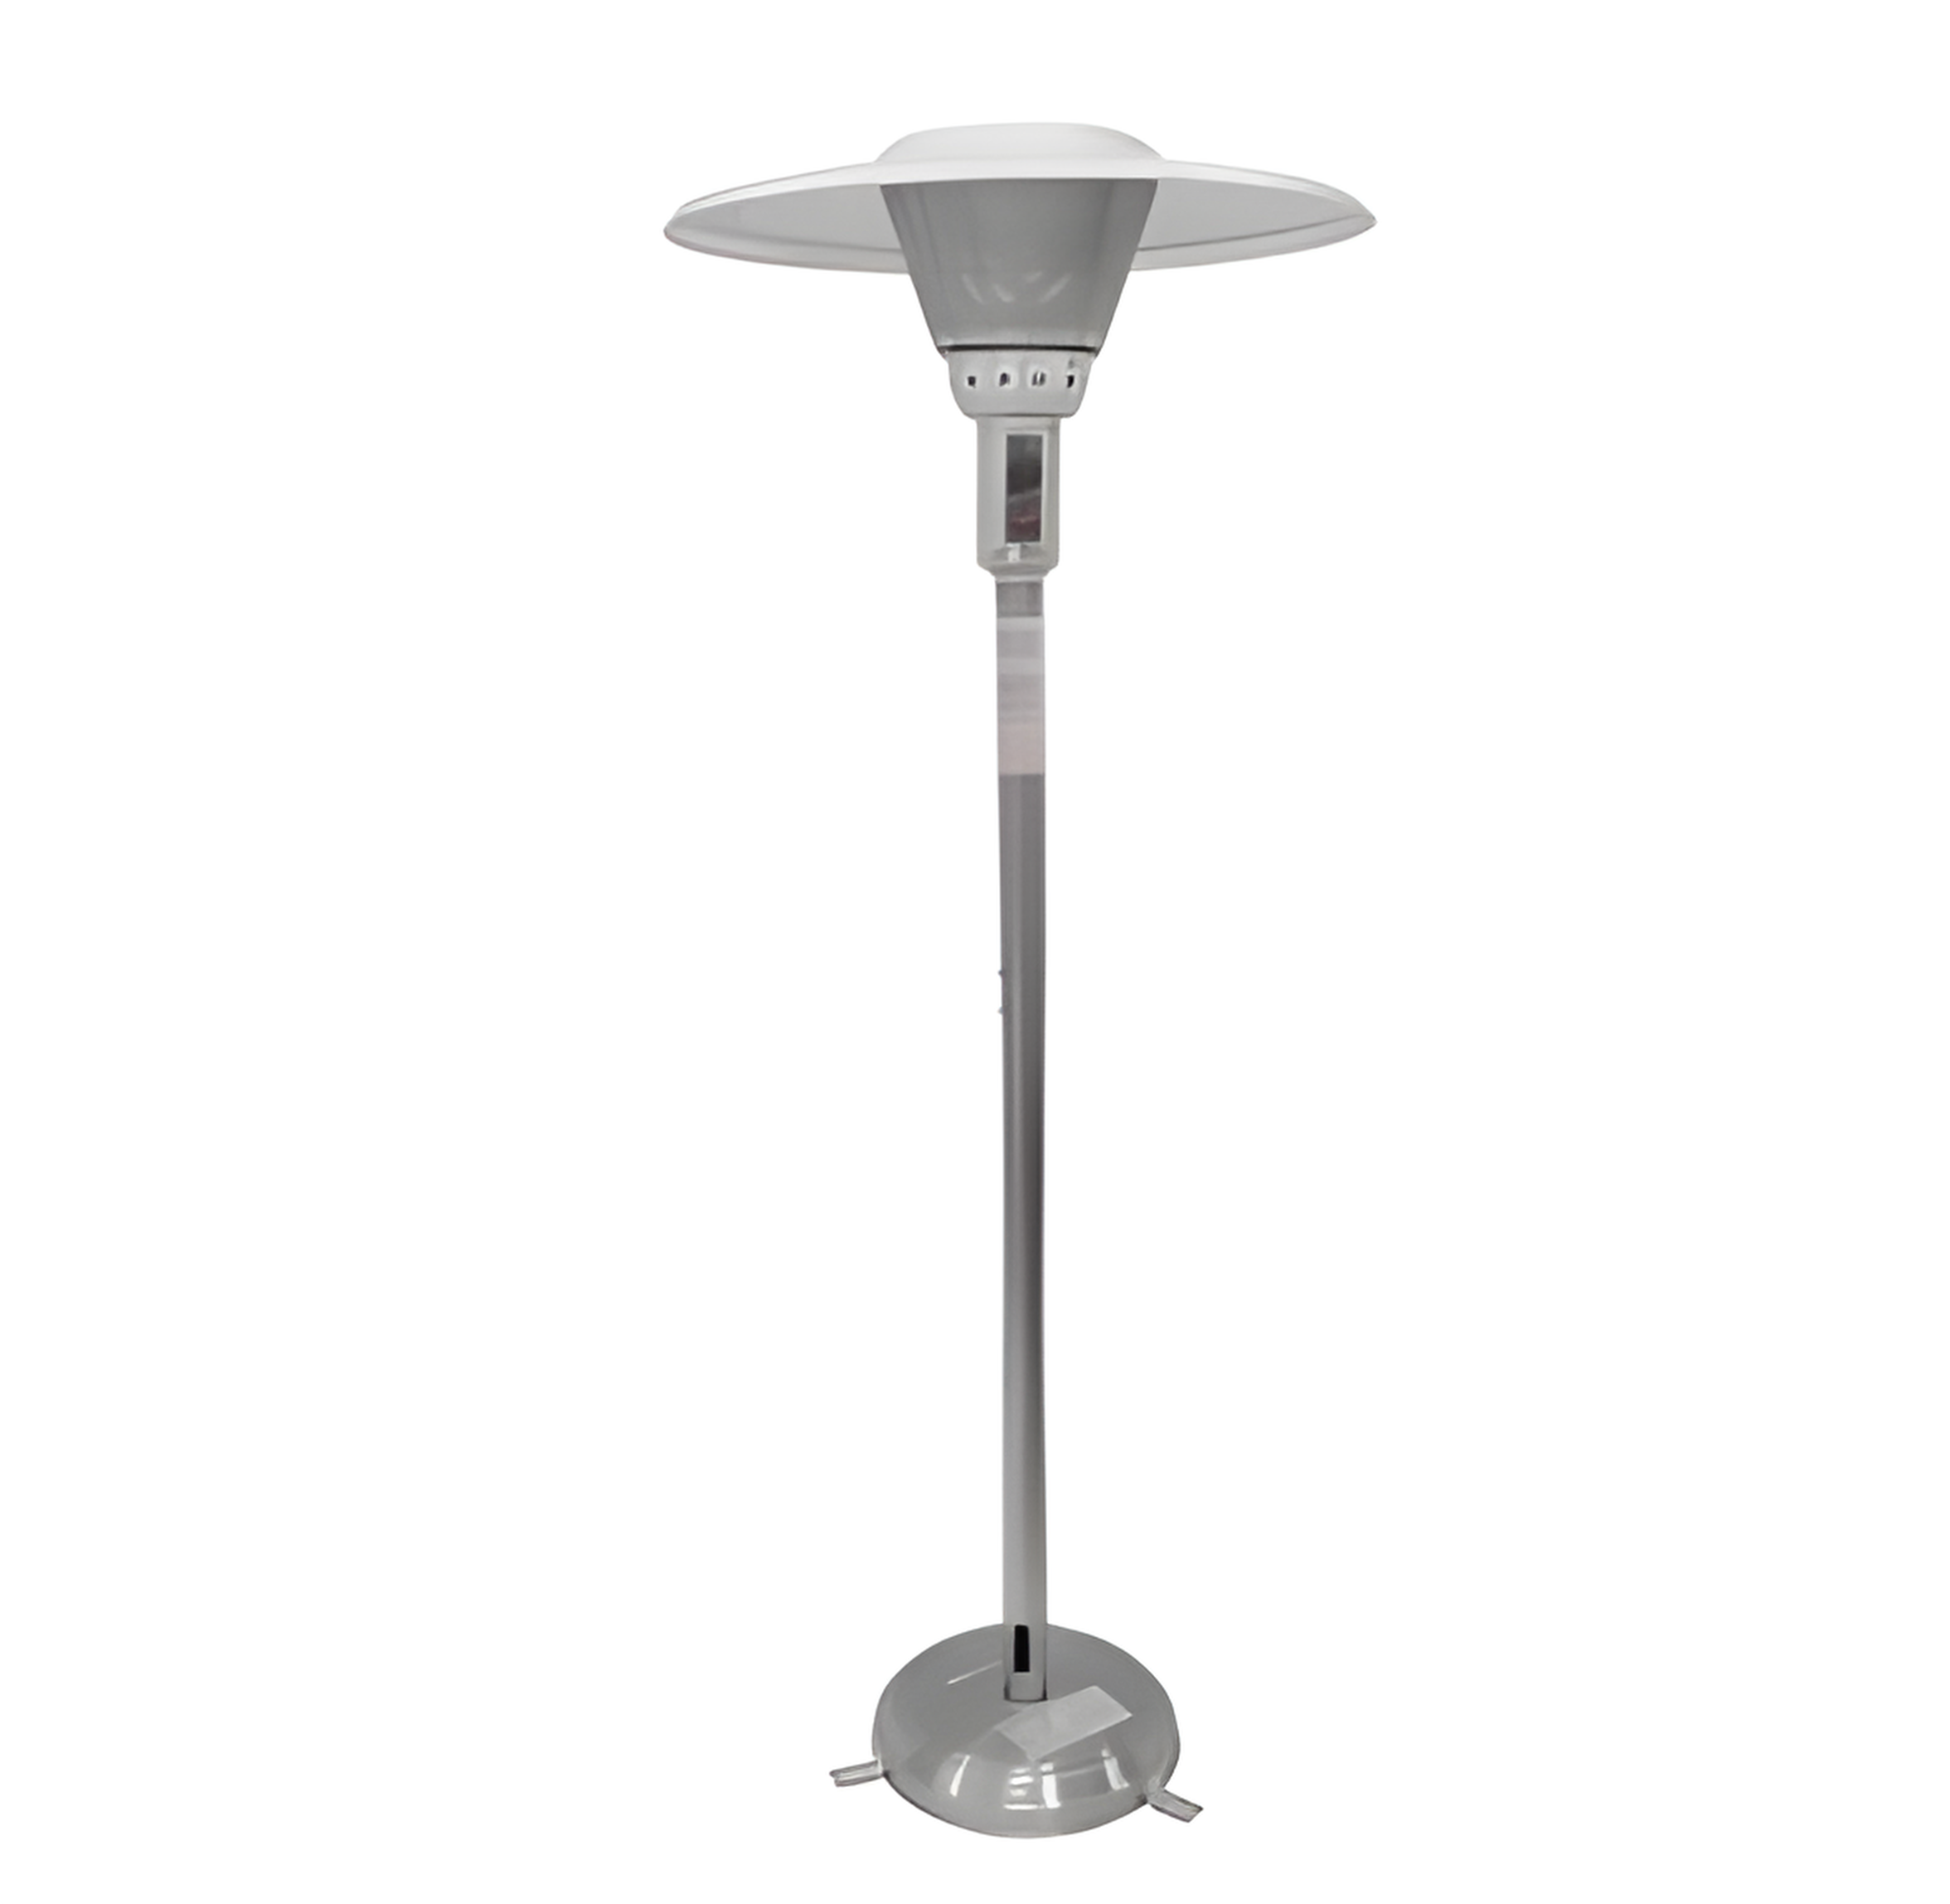 AZ Patio Heaters Stainless Steel Commercial Natural Gas Patio Heater